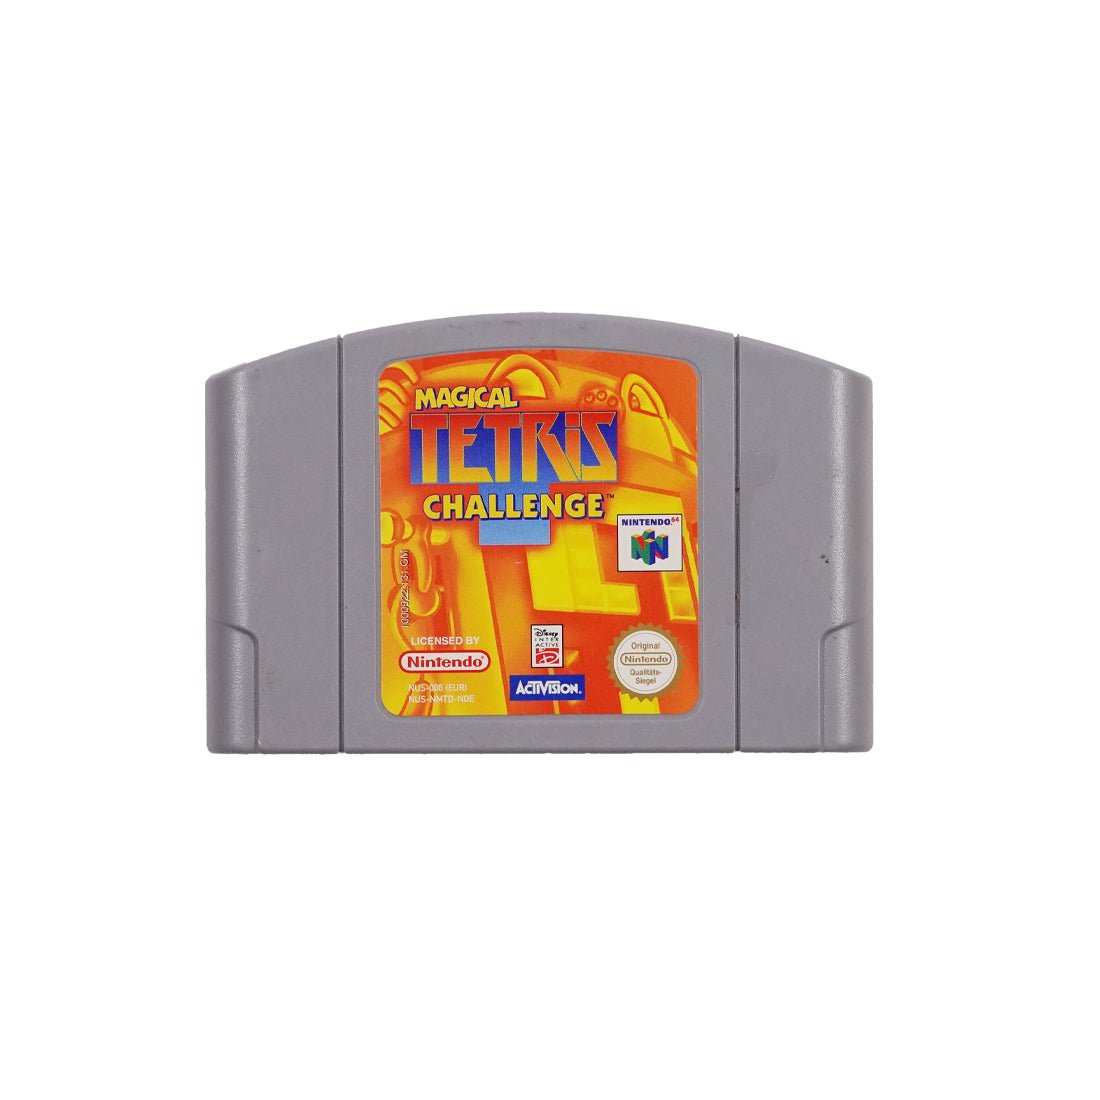 (Pre-Owned) Magical Tetris Challenge - Nintendo 64 - Store 974 | ستور ٩٧٤